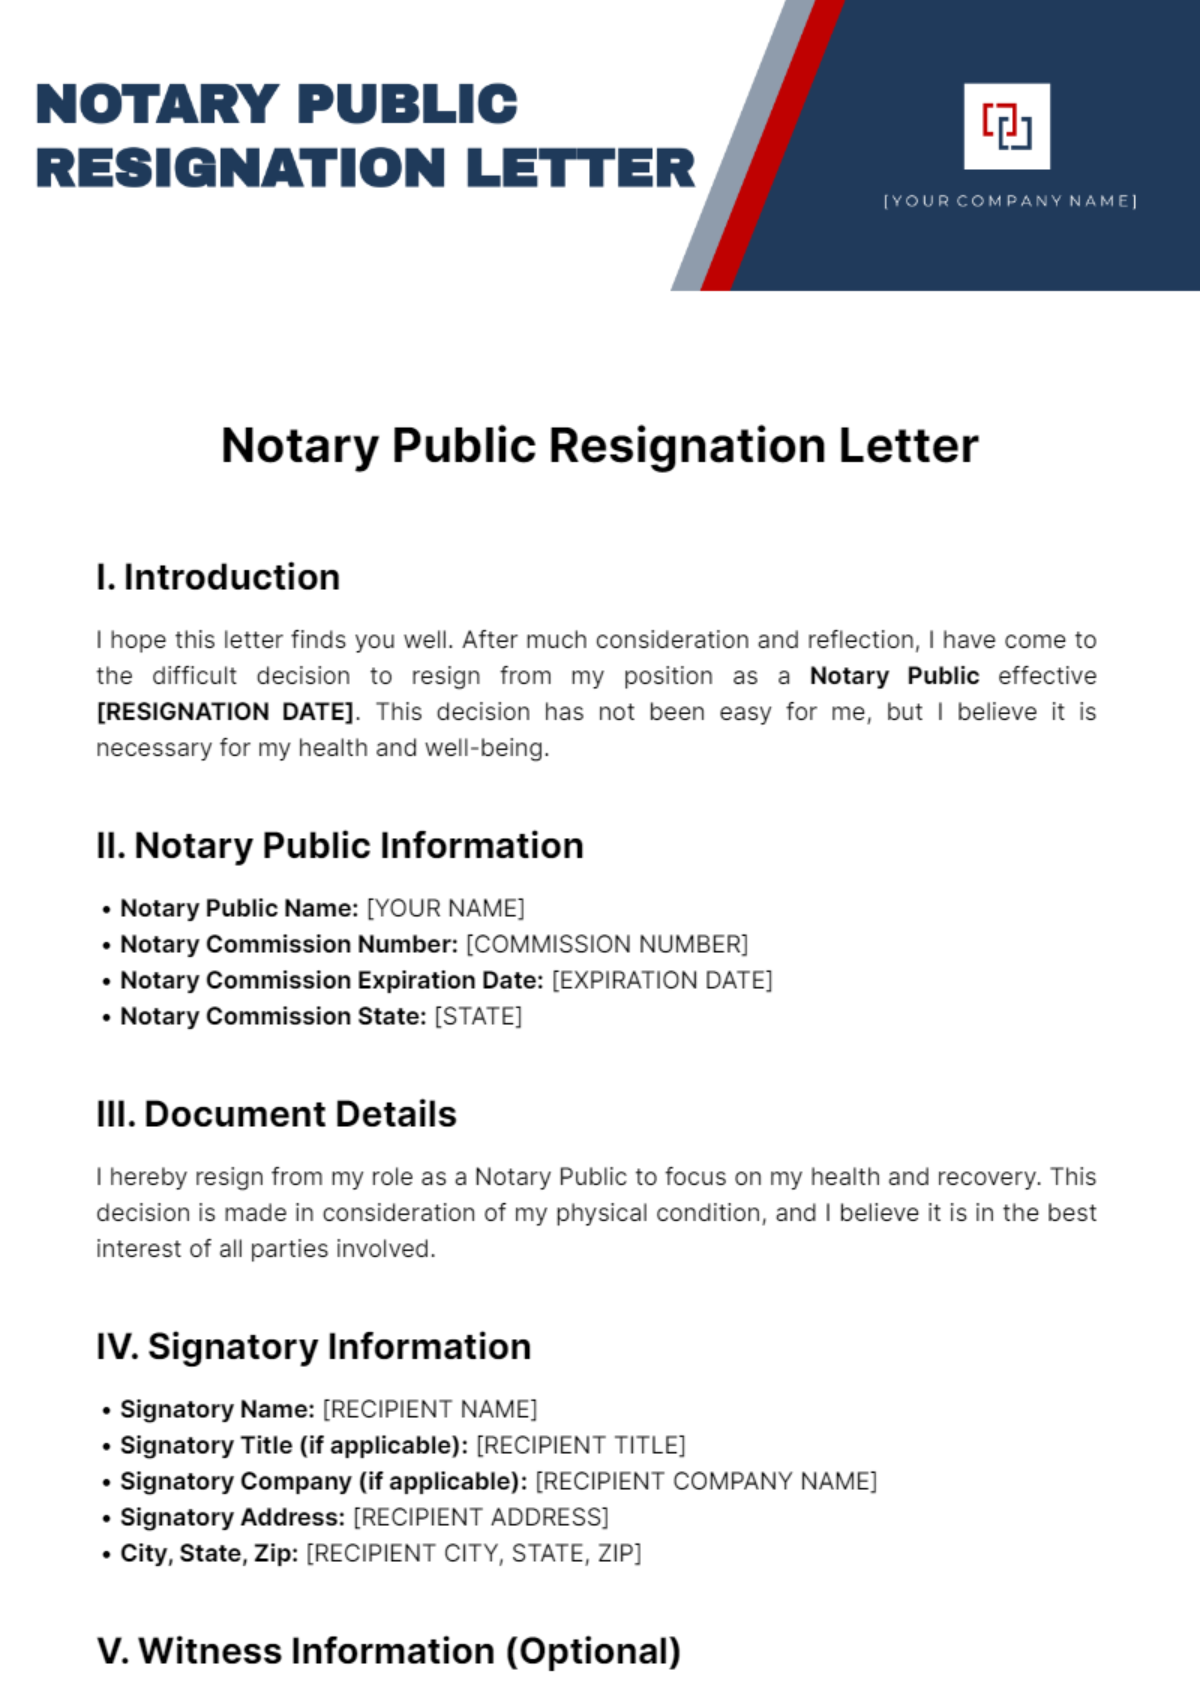 Free Notary Public Resignation Letter Template